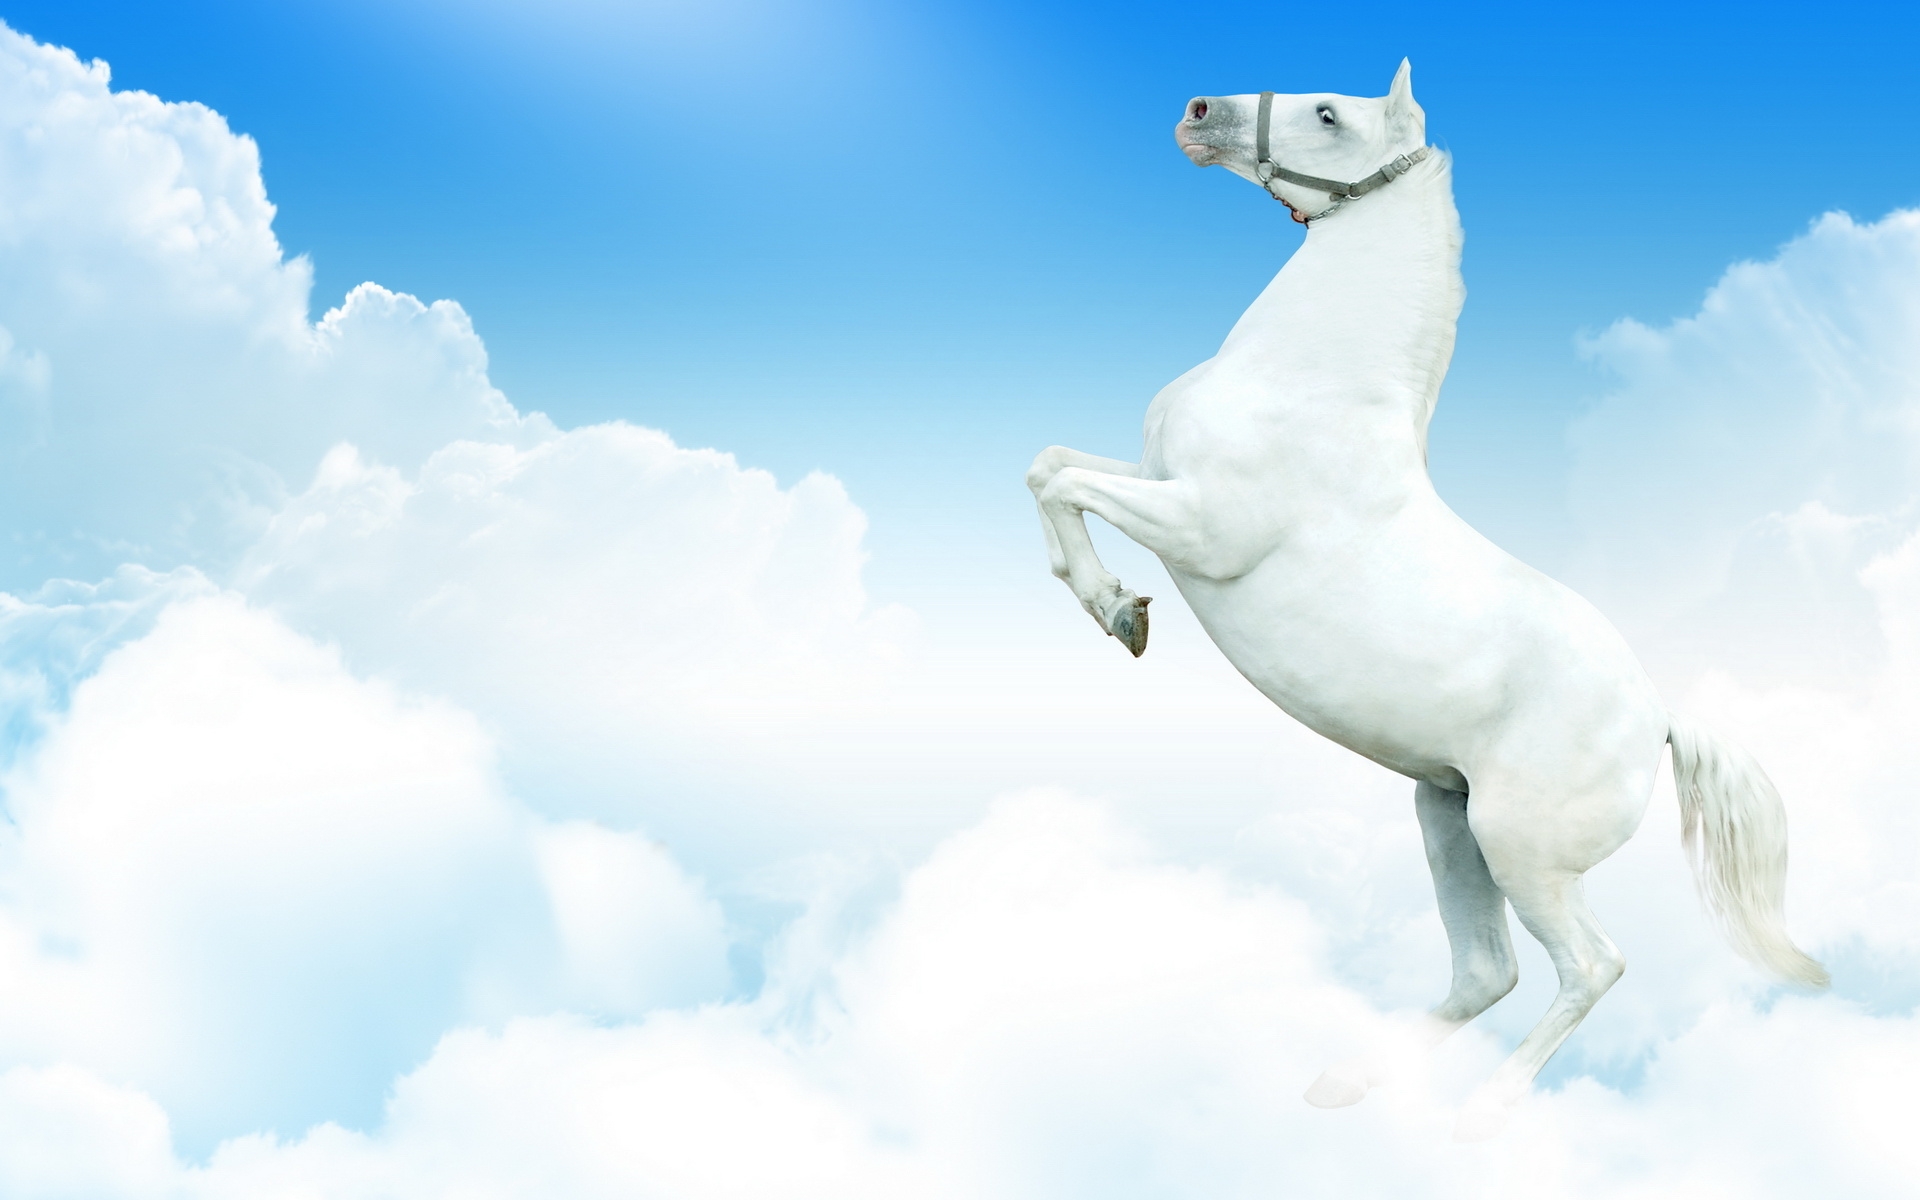 White horse in the clouds